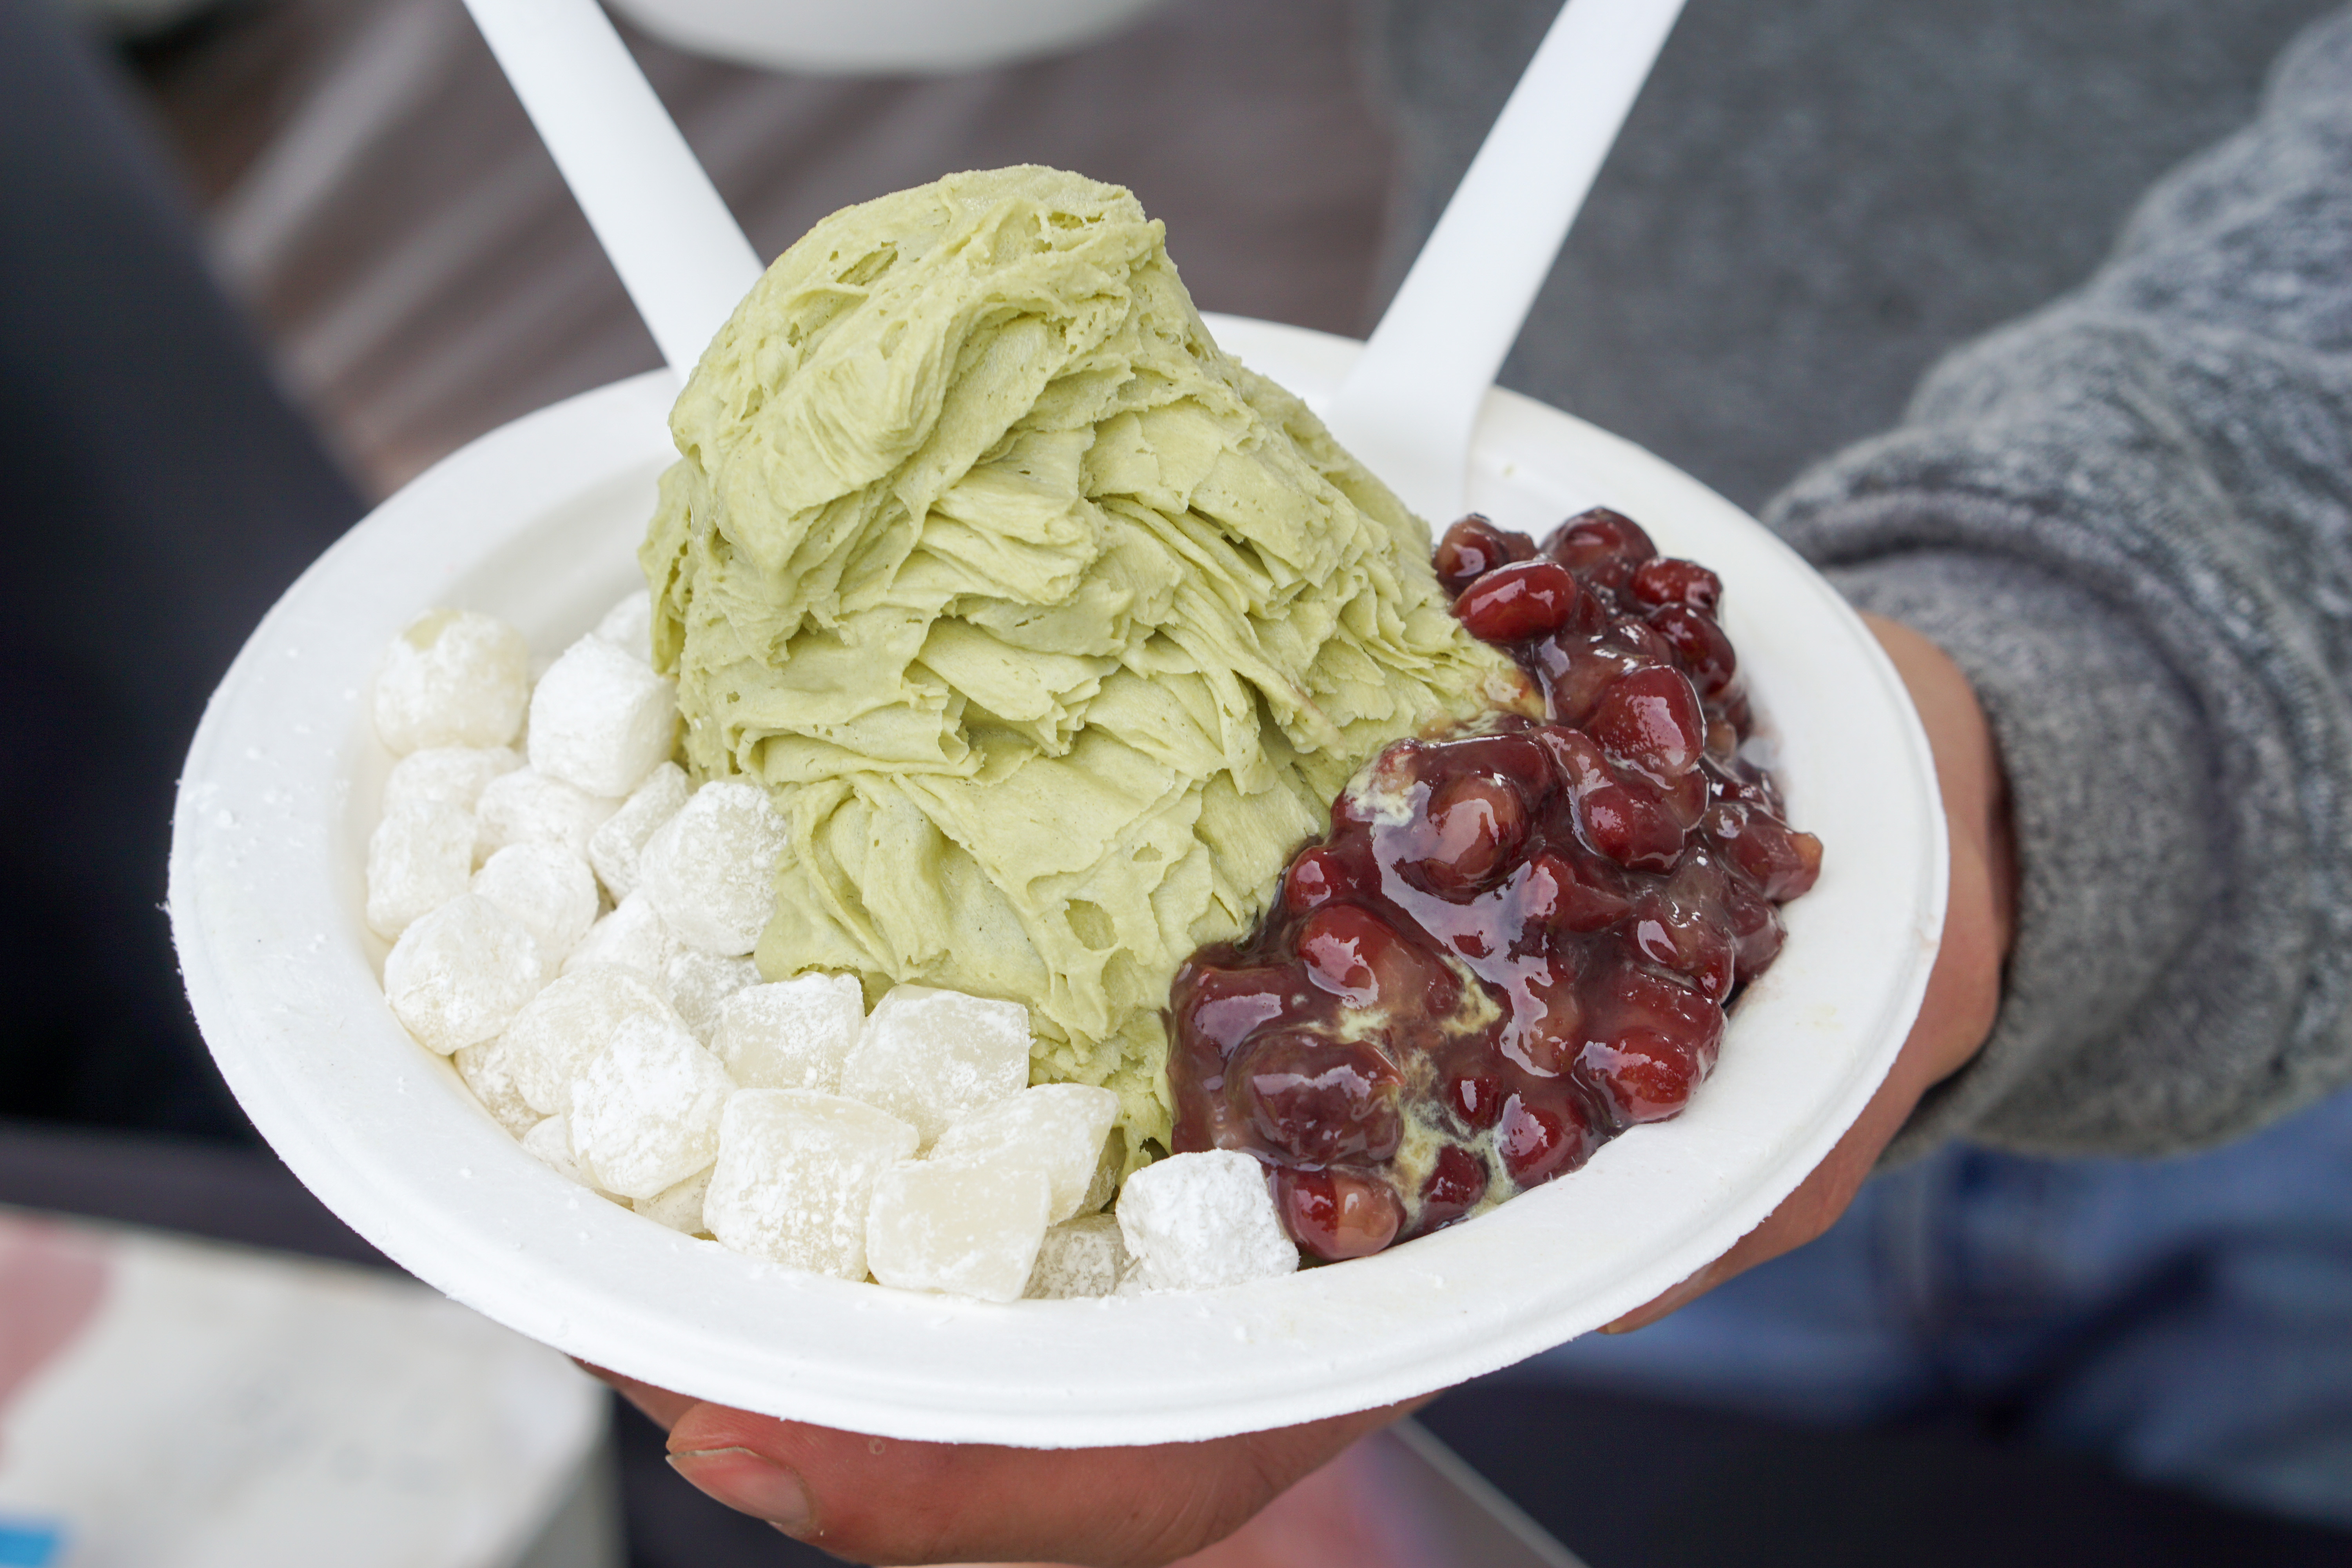 Powder Shaved Snow matcha with red bean and mochi